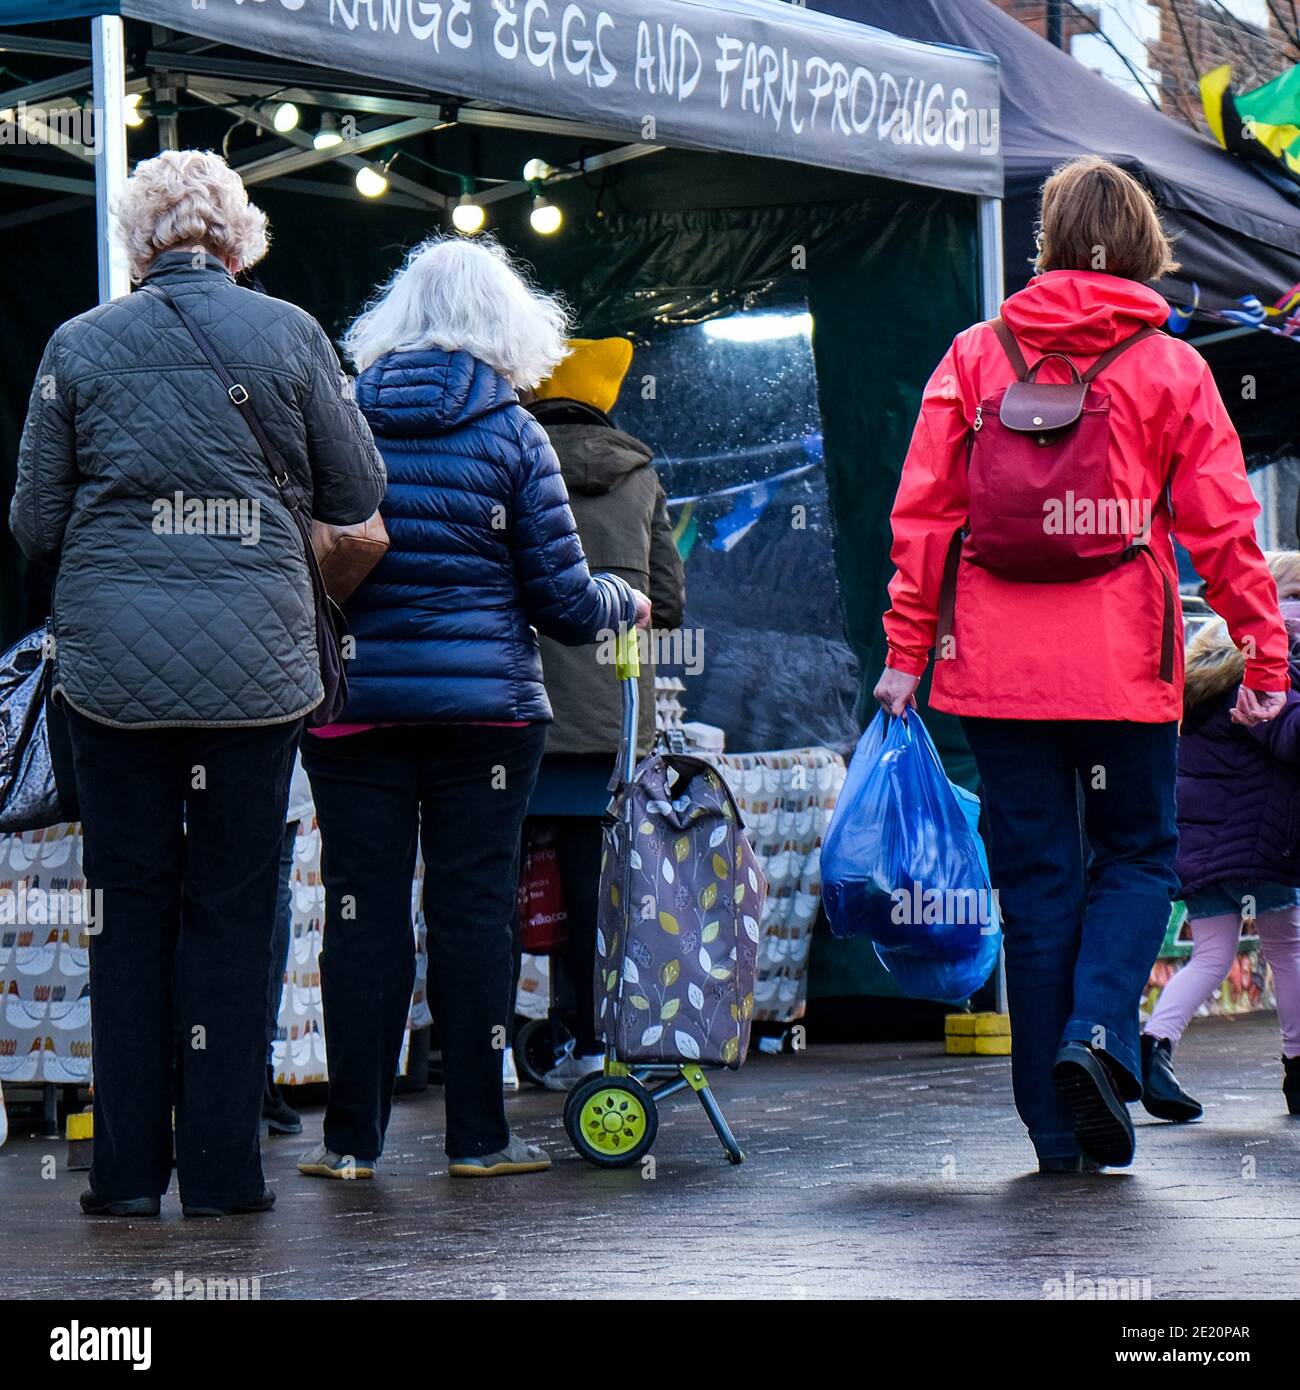 London UK, Small Group Of People Shopping At An Outdoor Market Stall Selling Fresh Farm Produce Stock Photo